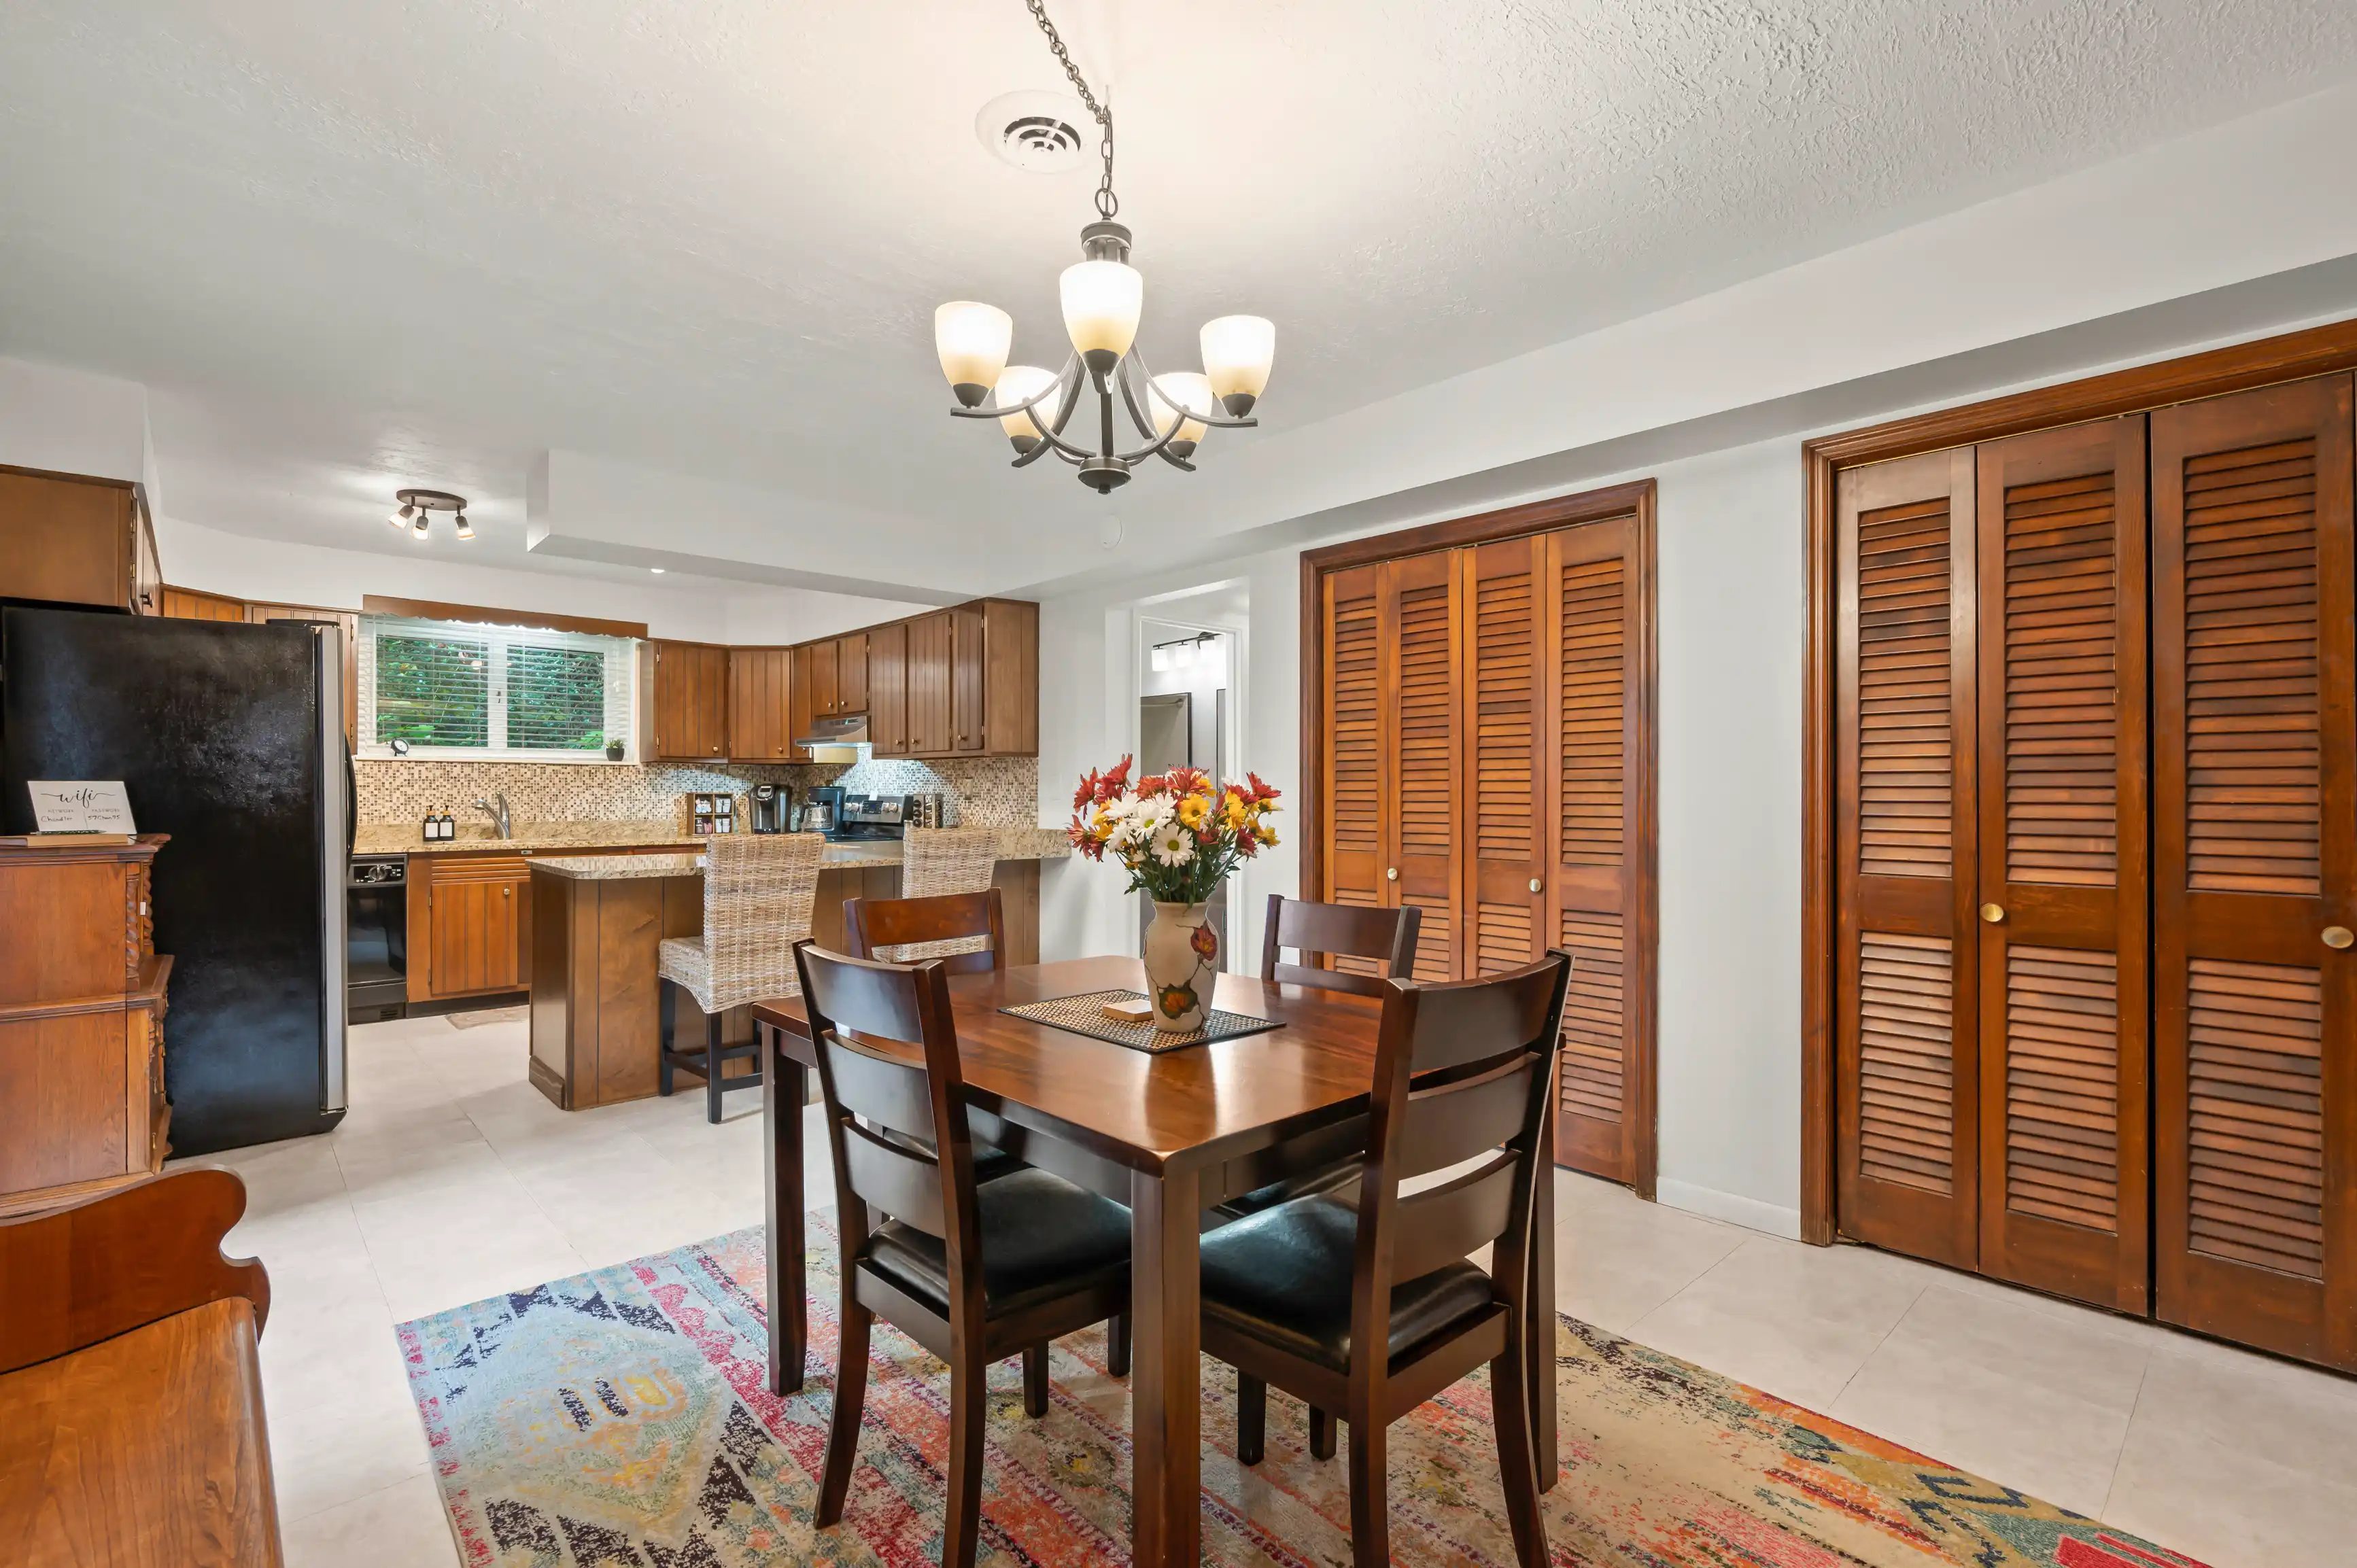 Spacious kitchen and dining area with wooden cabinetry, modern appliances, a dining table set, and a decorative rug.